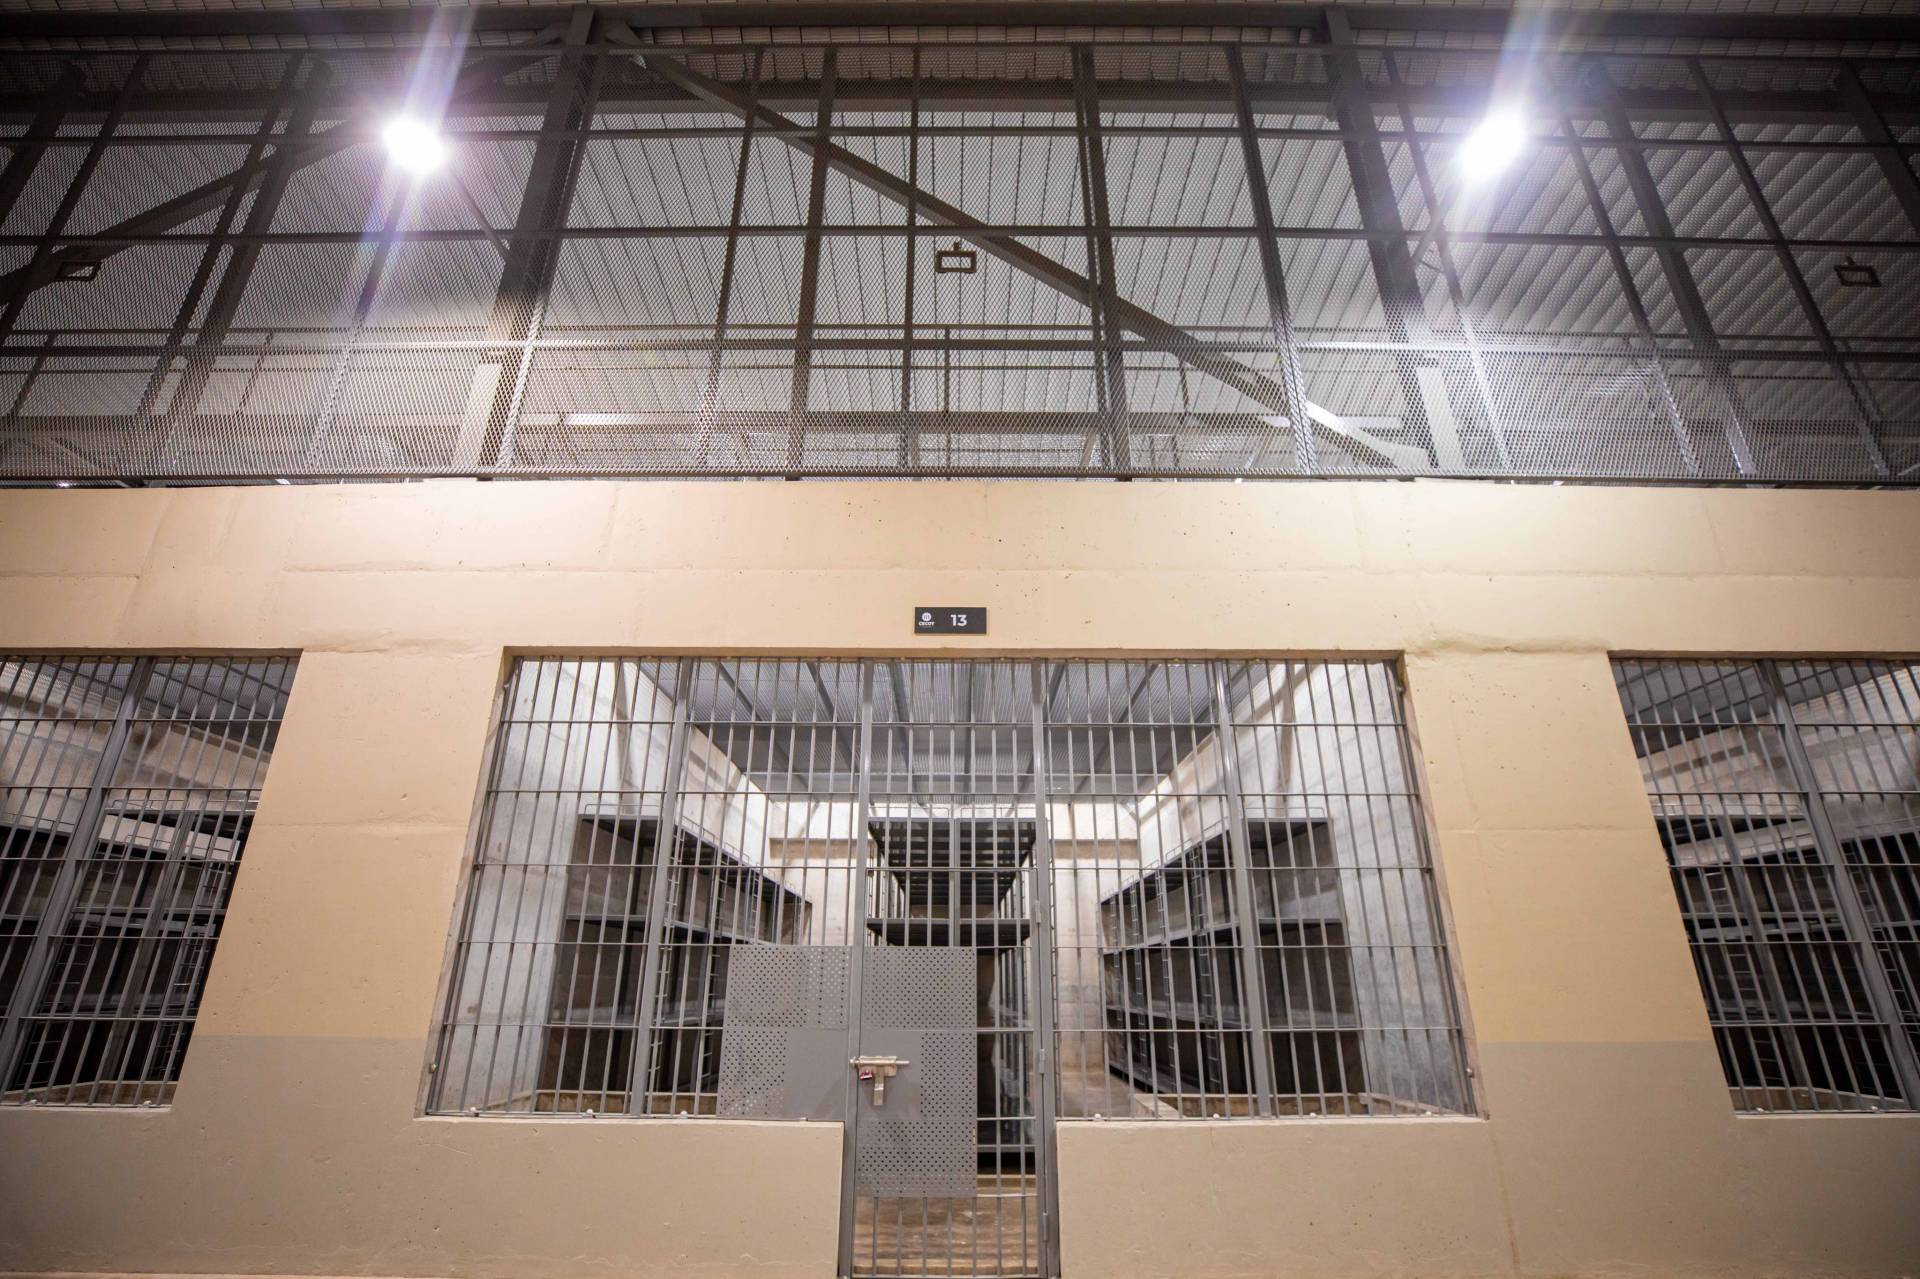 The government of El Salvador shows off a mega-prison that will soon be operational